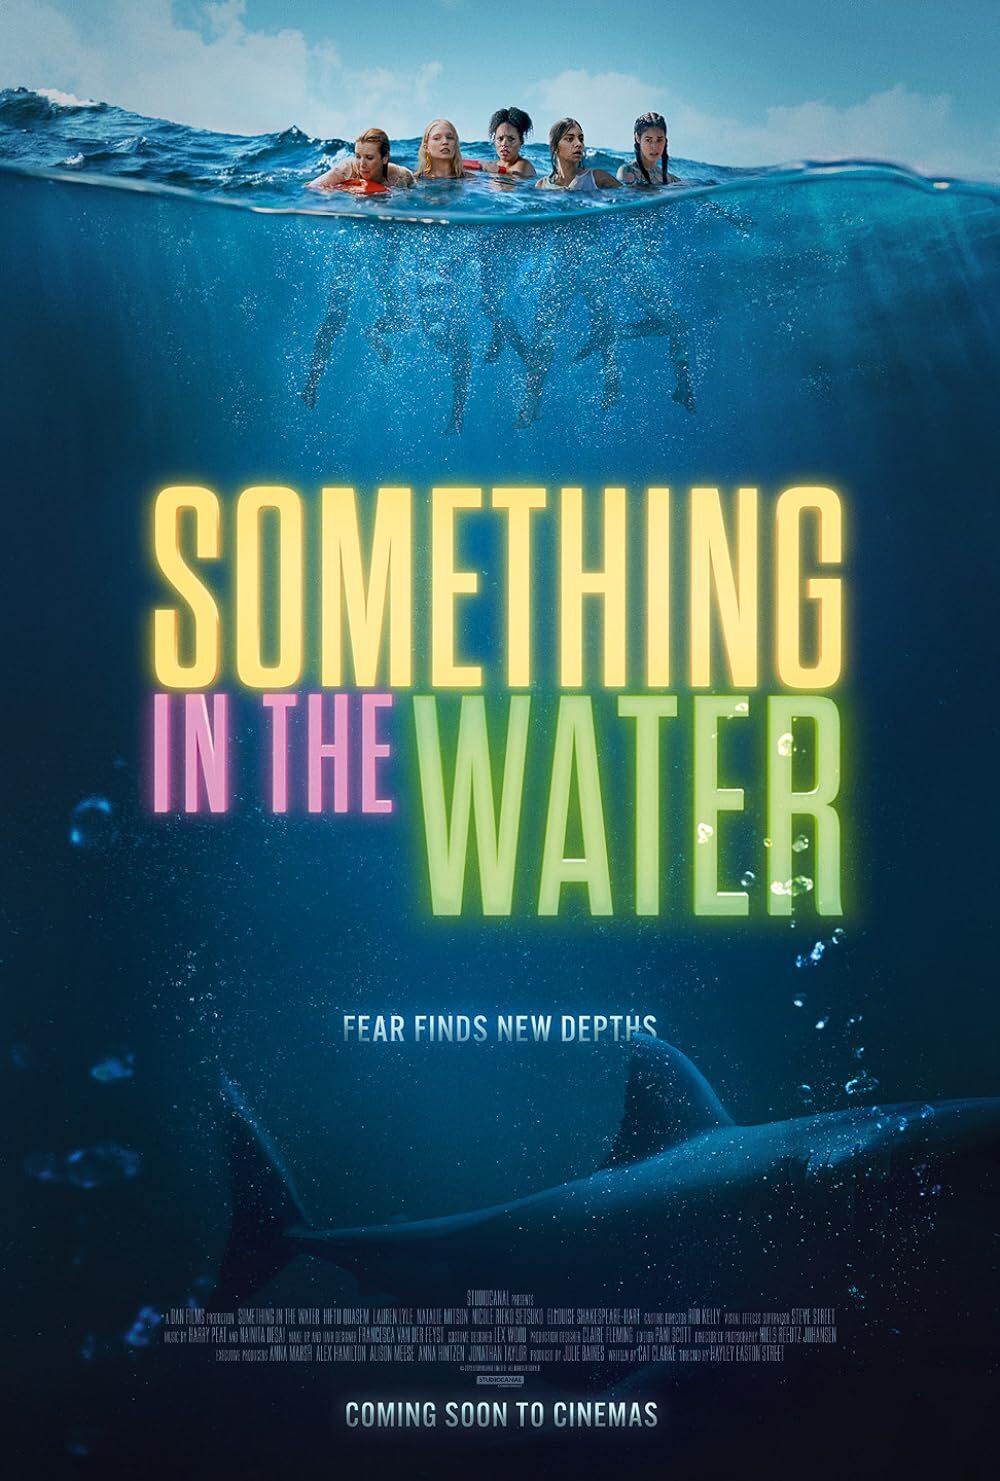 Movie poster for the movie Something in the Water.